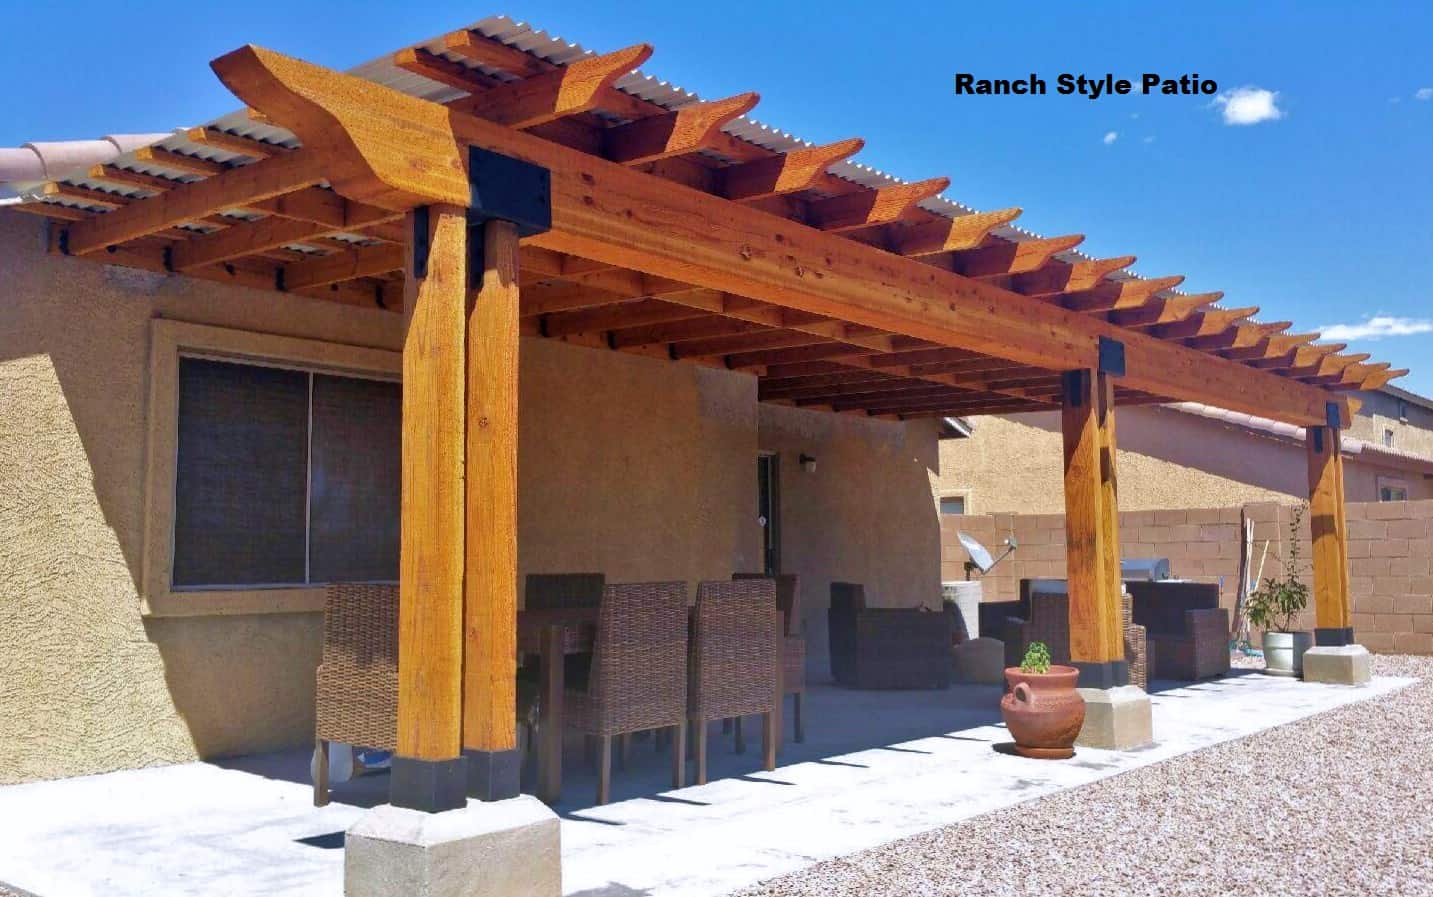 Large ranch style patio